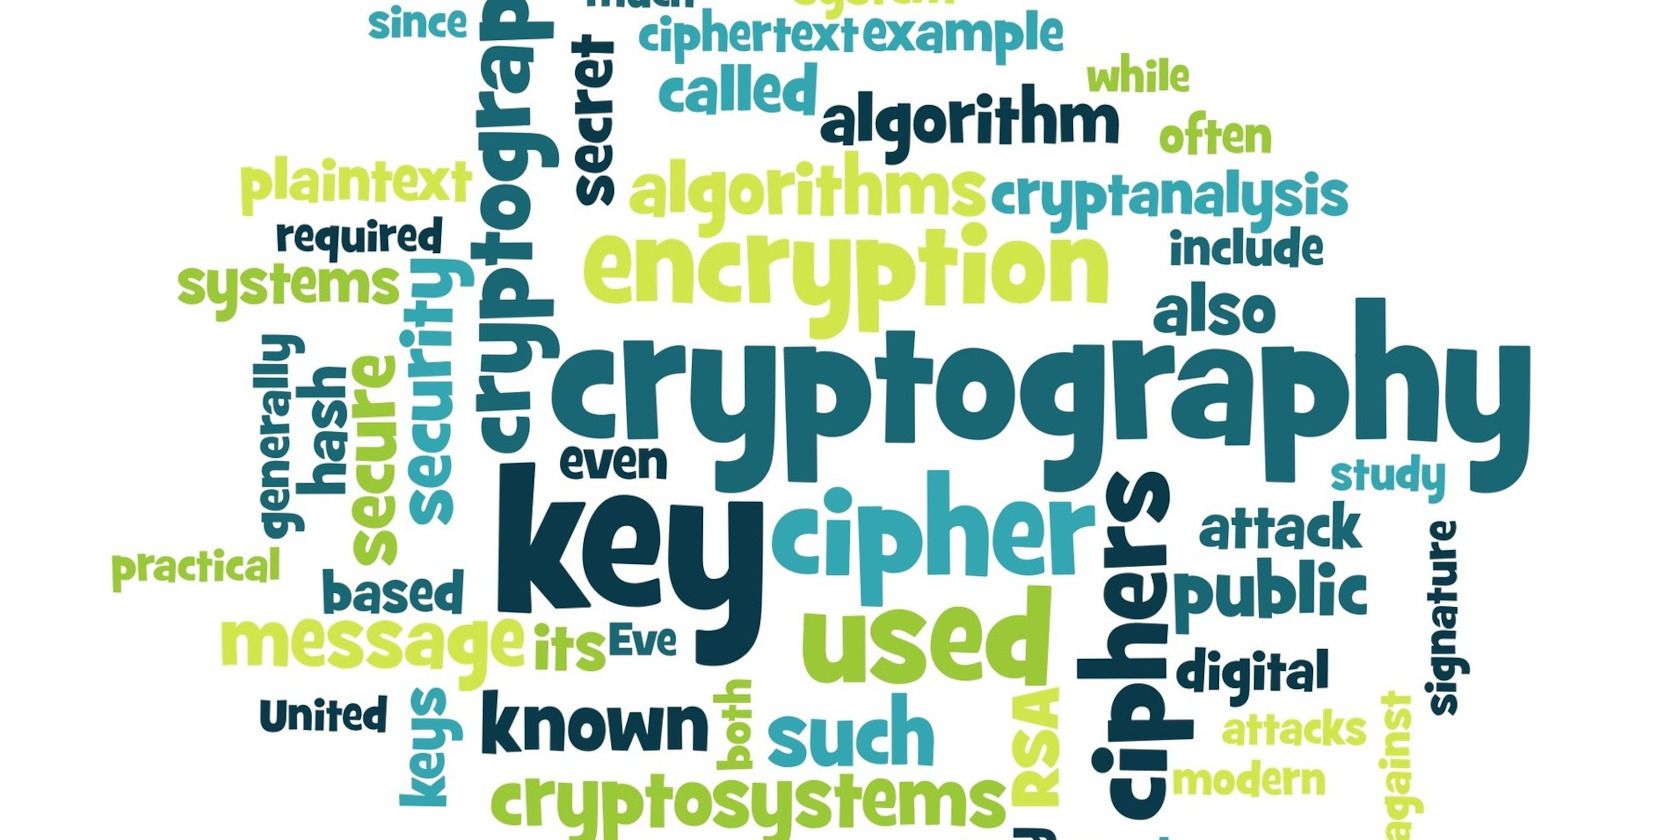 “cryptography” and associated words arranged in a word cloud